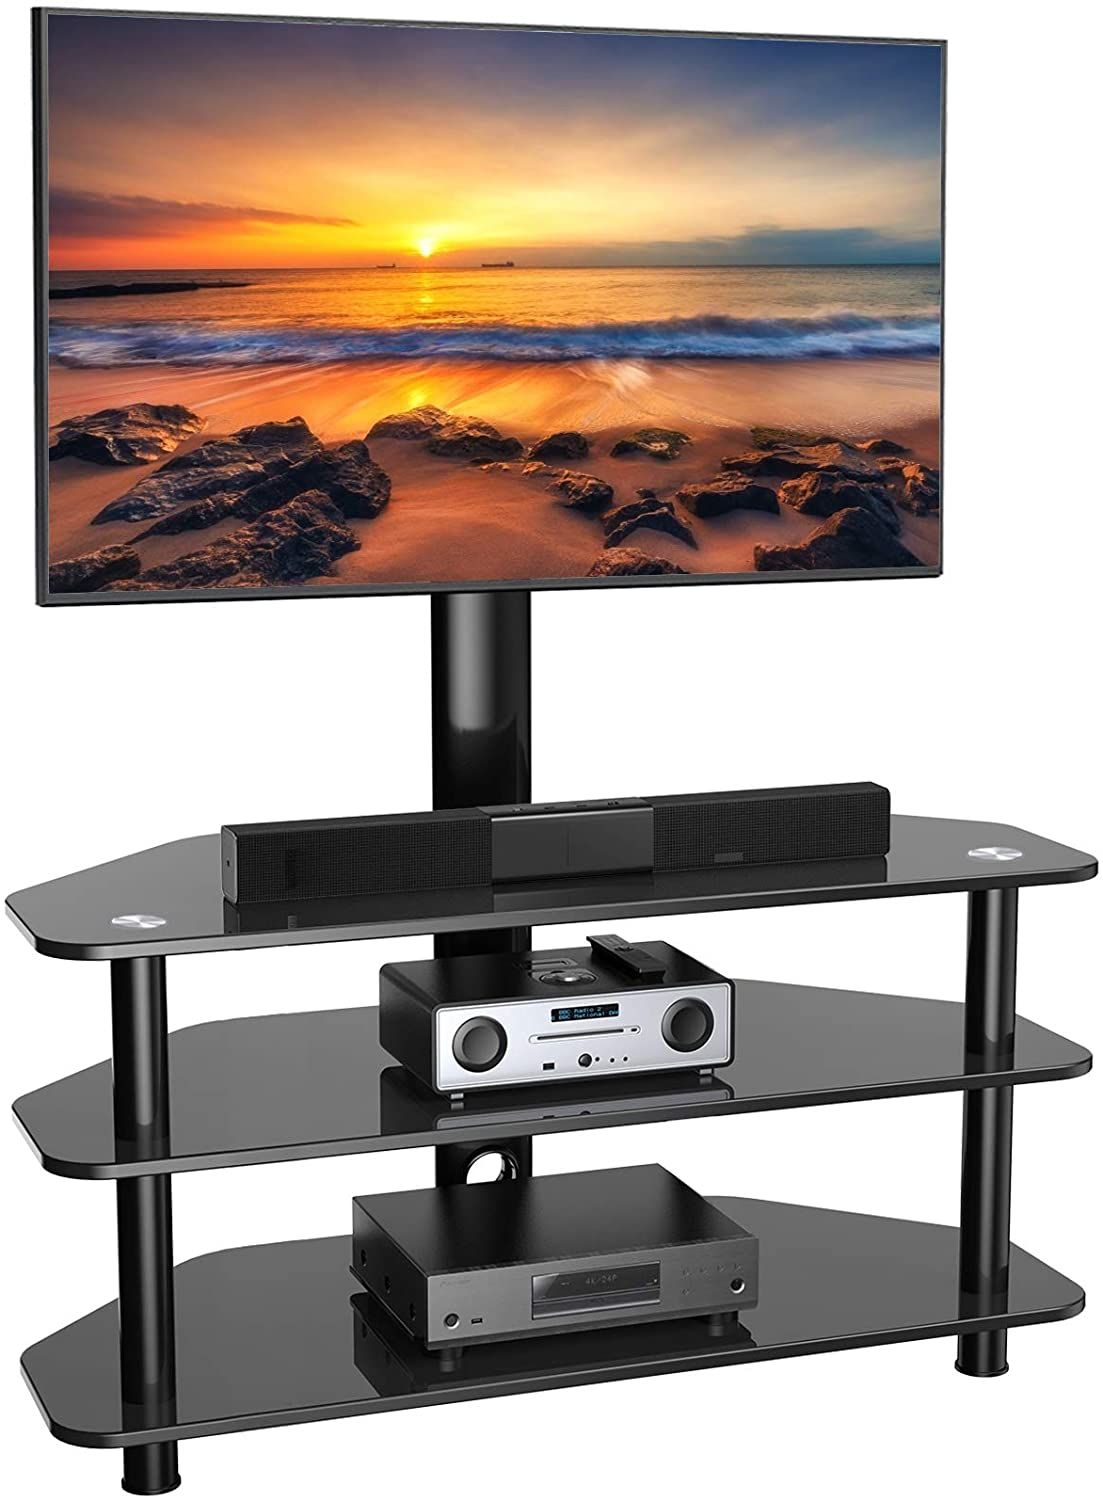 Swivel Floor Tv Stand/base For 32 65 Inch Tvs Universal Intended For 32 Inch Corner Tv Stands (View 6 of 15)